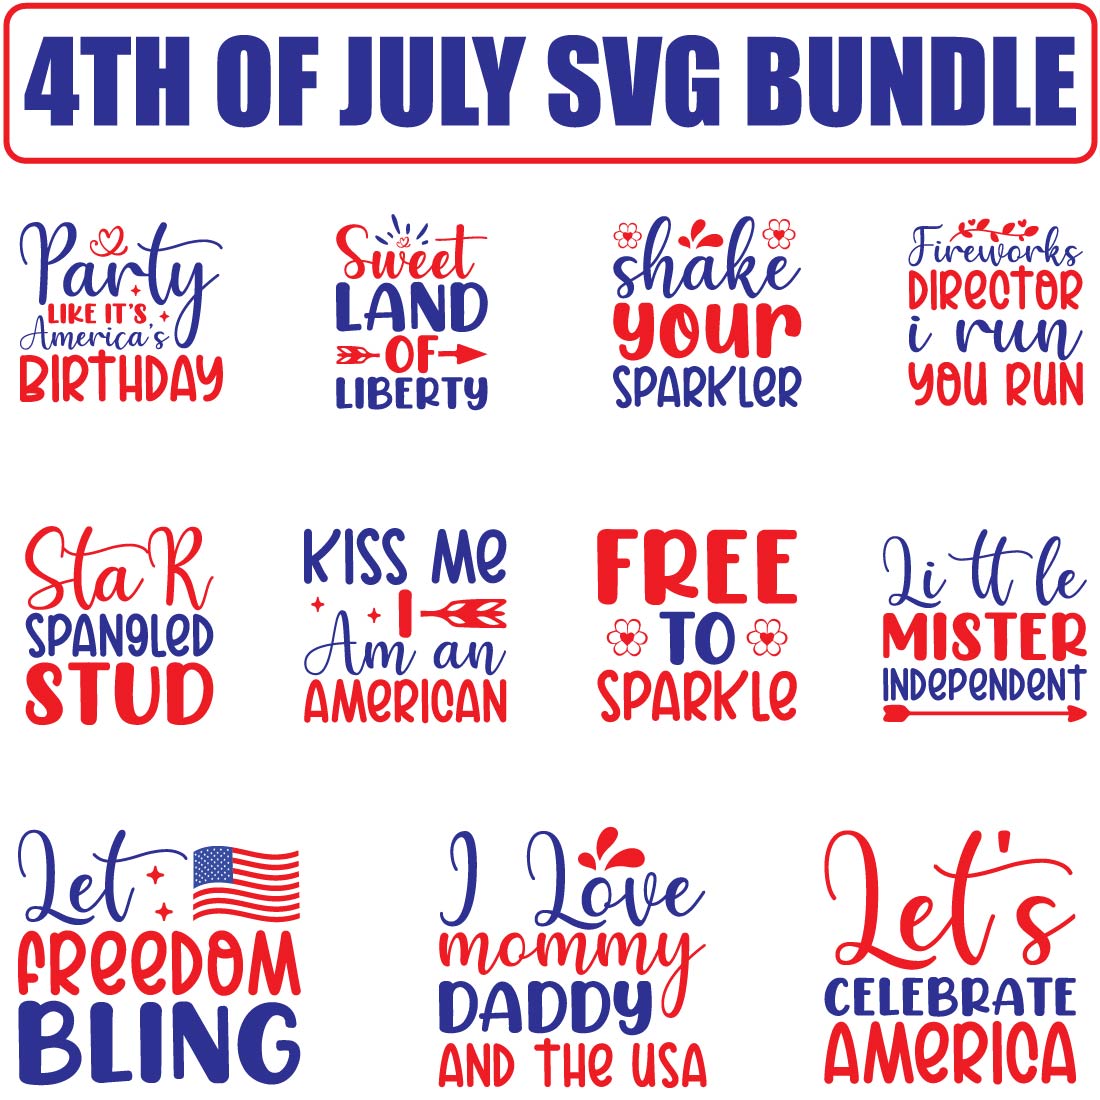 4th Of July SVG Bundle preview image.